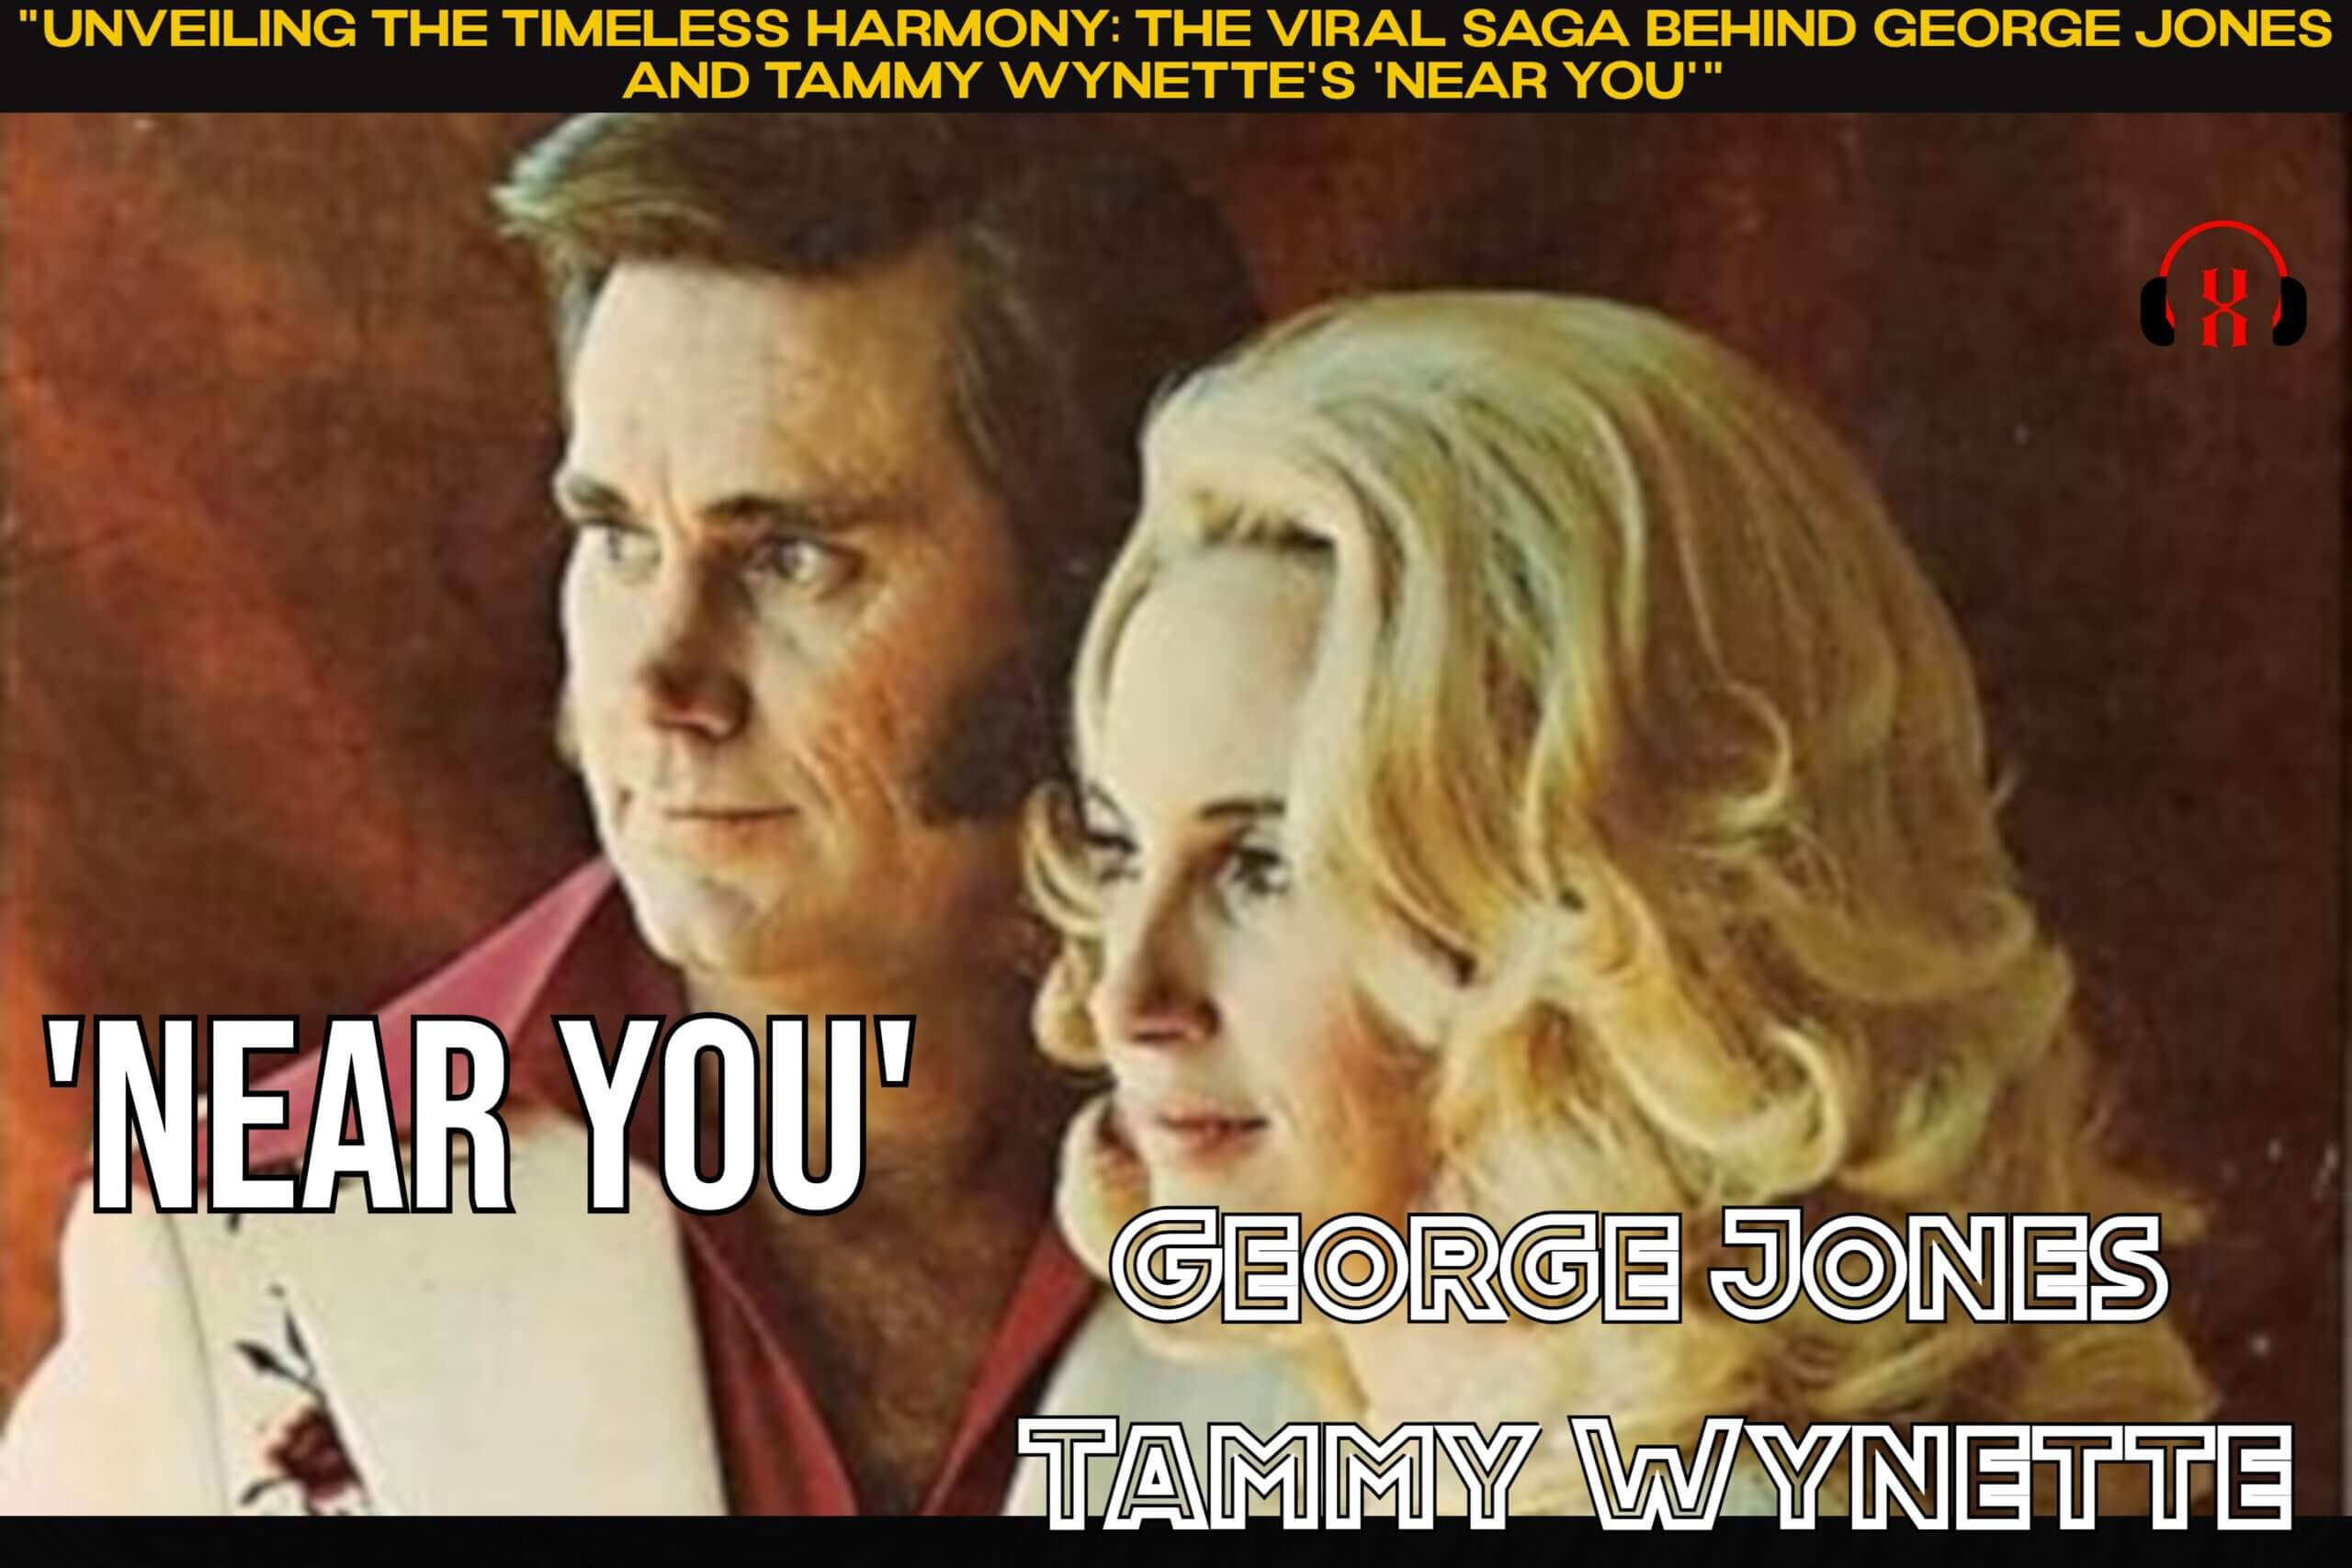 "Unveiling the Timeless Harmony: The Viral Saga Behind George Jones and Tammy Wynette's 'Near You'"